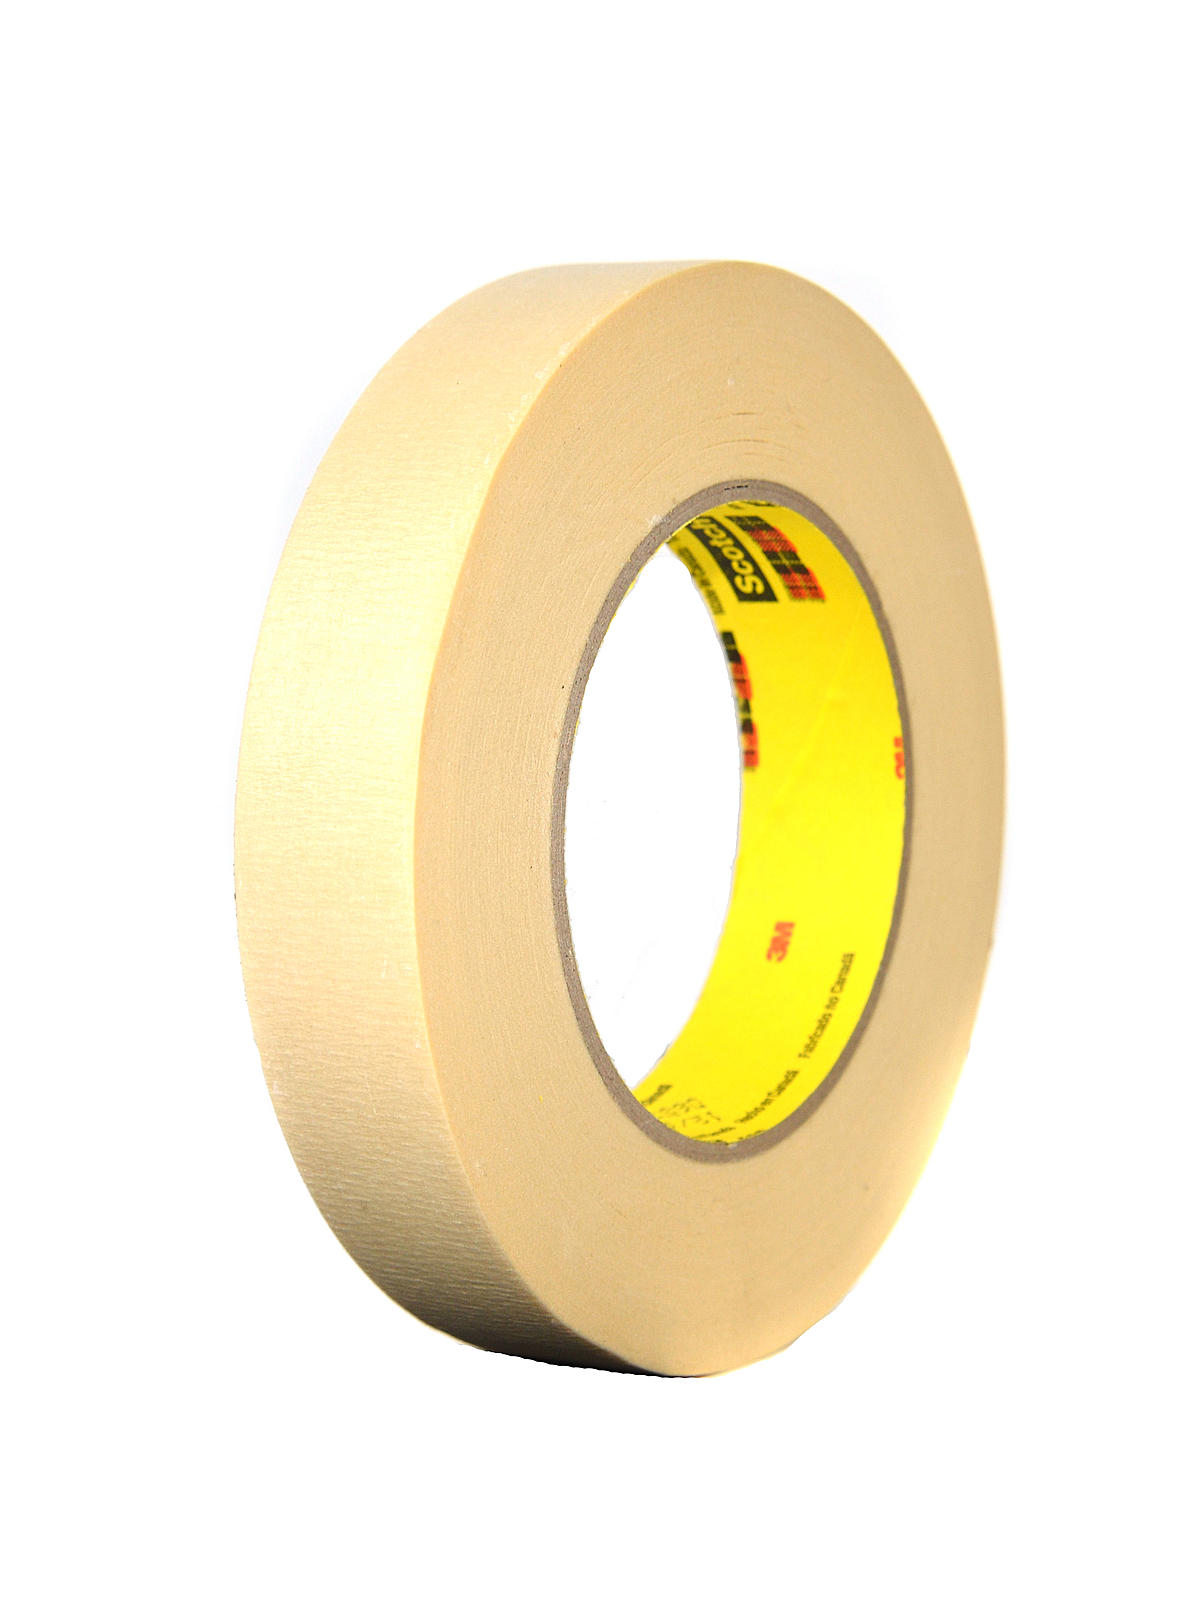 Crepe Masking Tape 202 1 In. X 60 Yd.